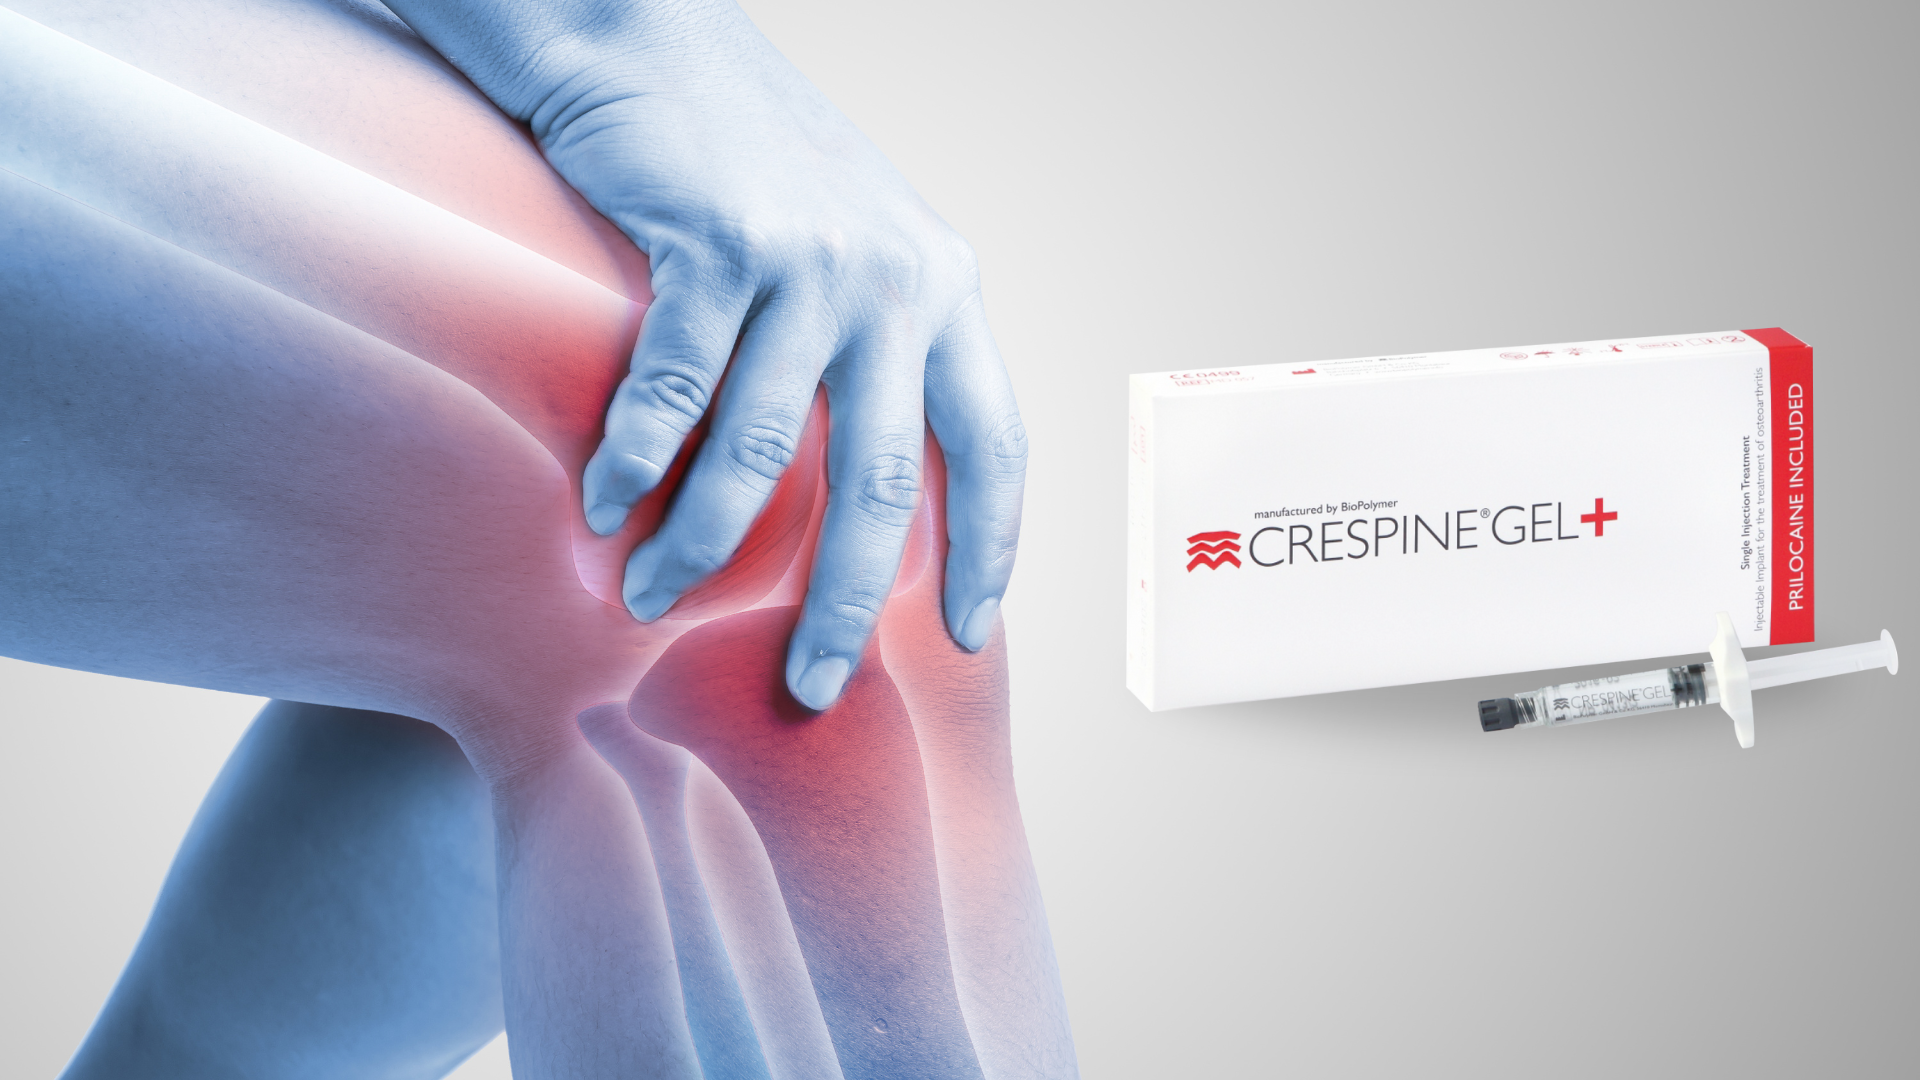 Crespine injection for knee pain.